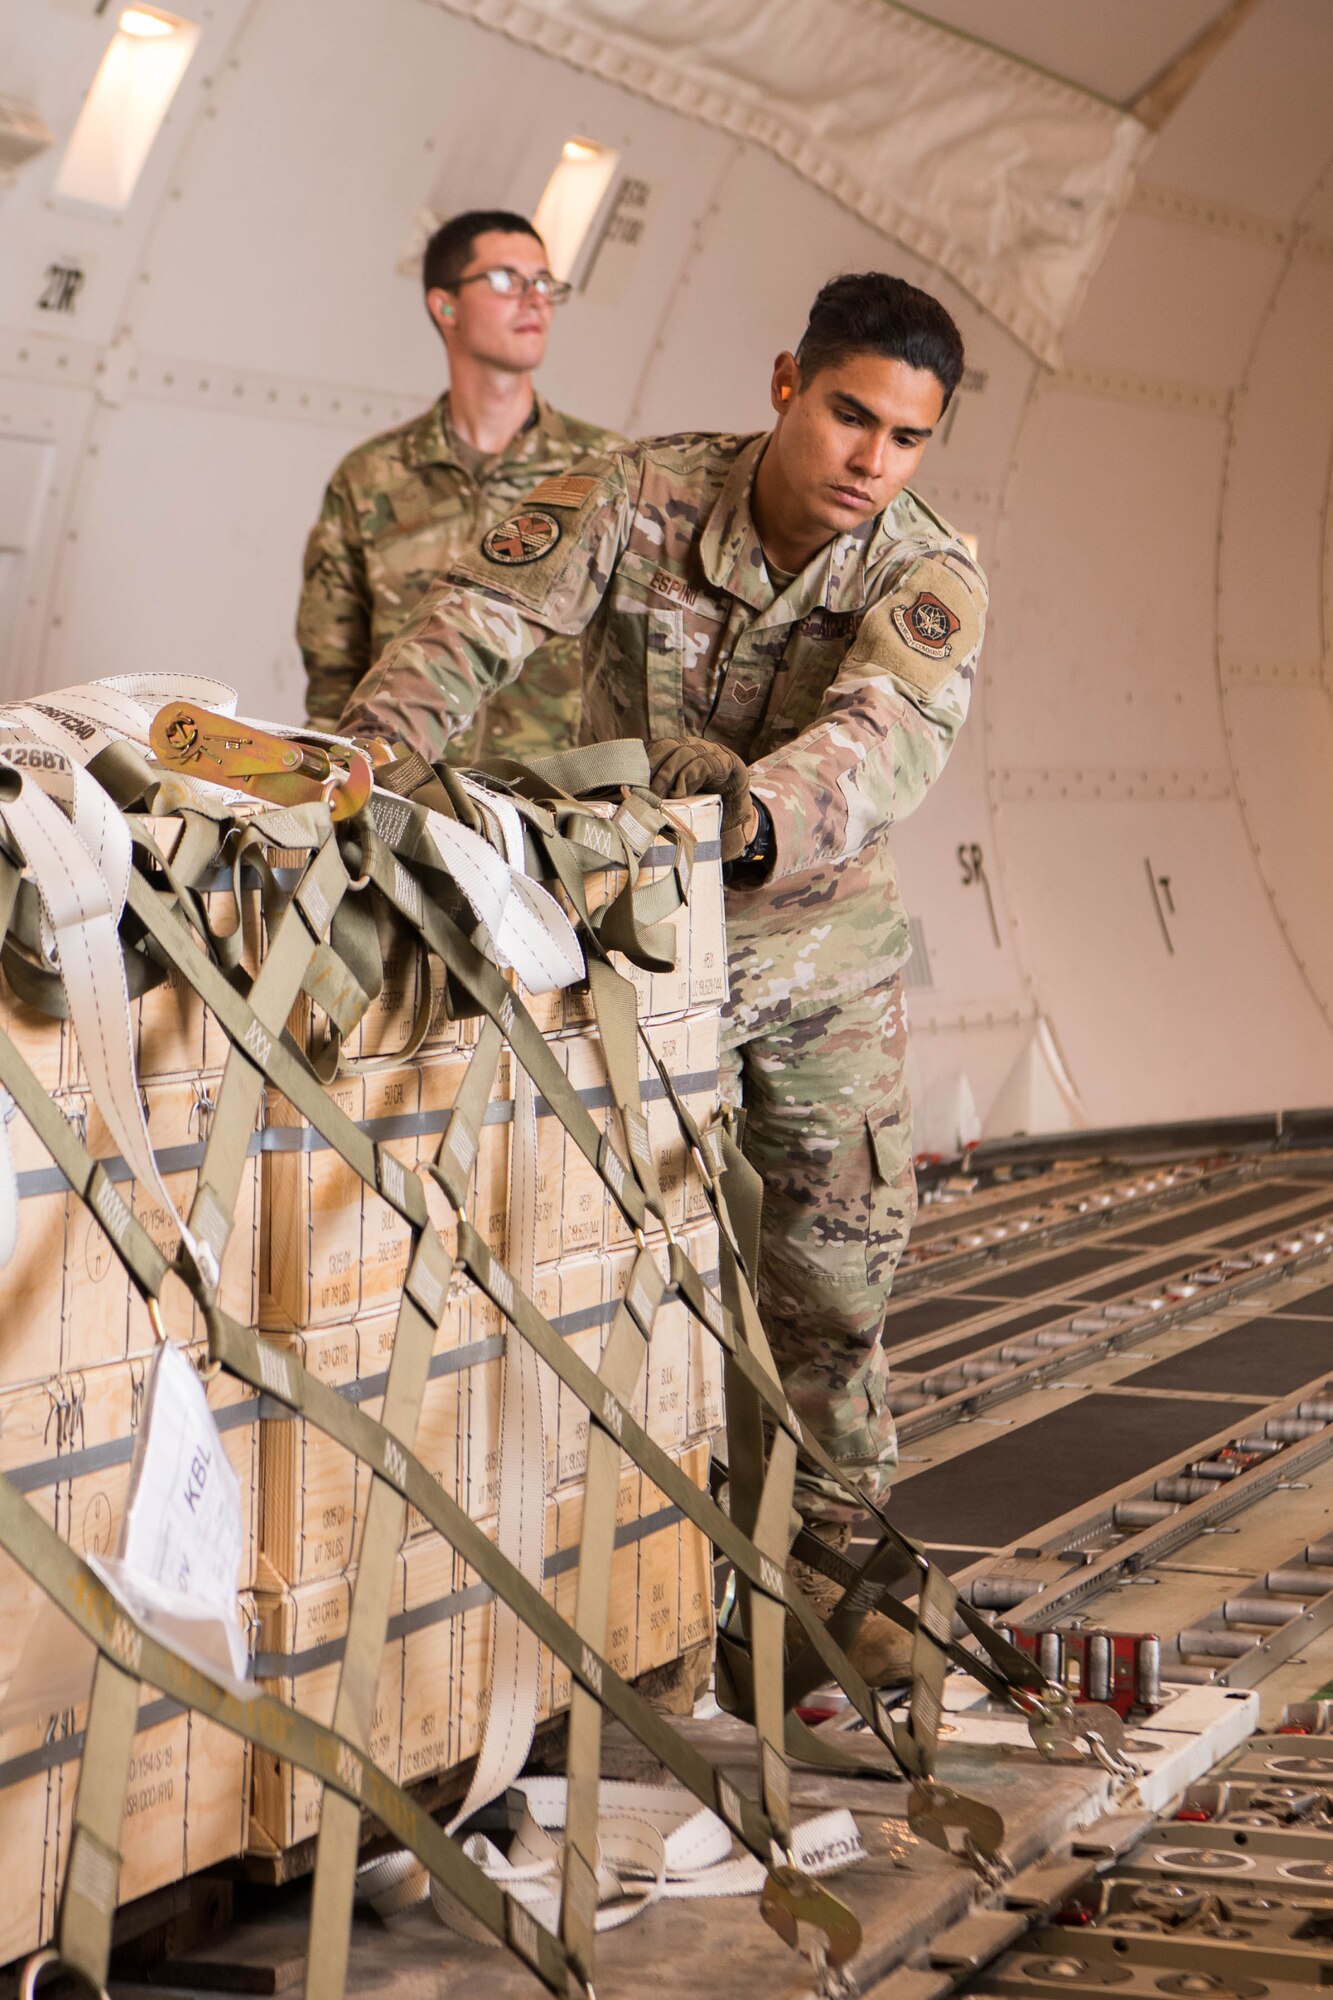 Staff Sgt. Manuel Espino, 436th Aerial Port Squadron ramp services supervisor, pushes a pallet of materiel into place on an aircraft bound for Ukraine, at Dover Air Force Base, Delaware, June 22, 2021. Missions like this demonstrate the U.S. commitment to Ukraine’s independence, sovereignty and territorial integrity. (U.S. Air Force photo by Mauricio Campino)